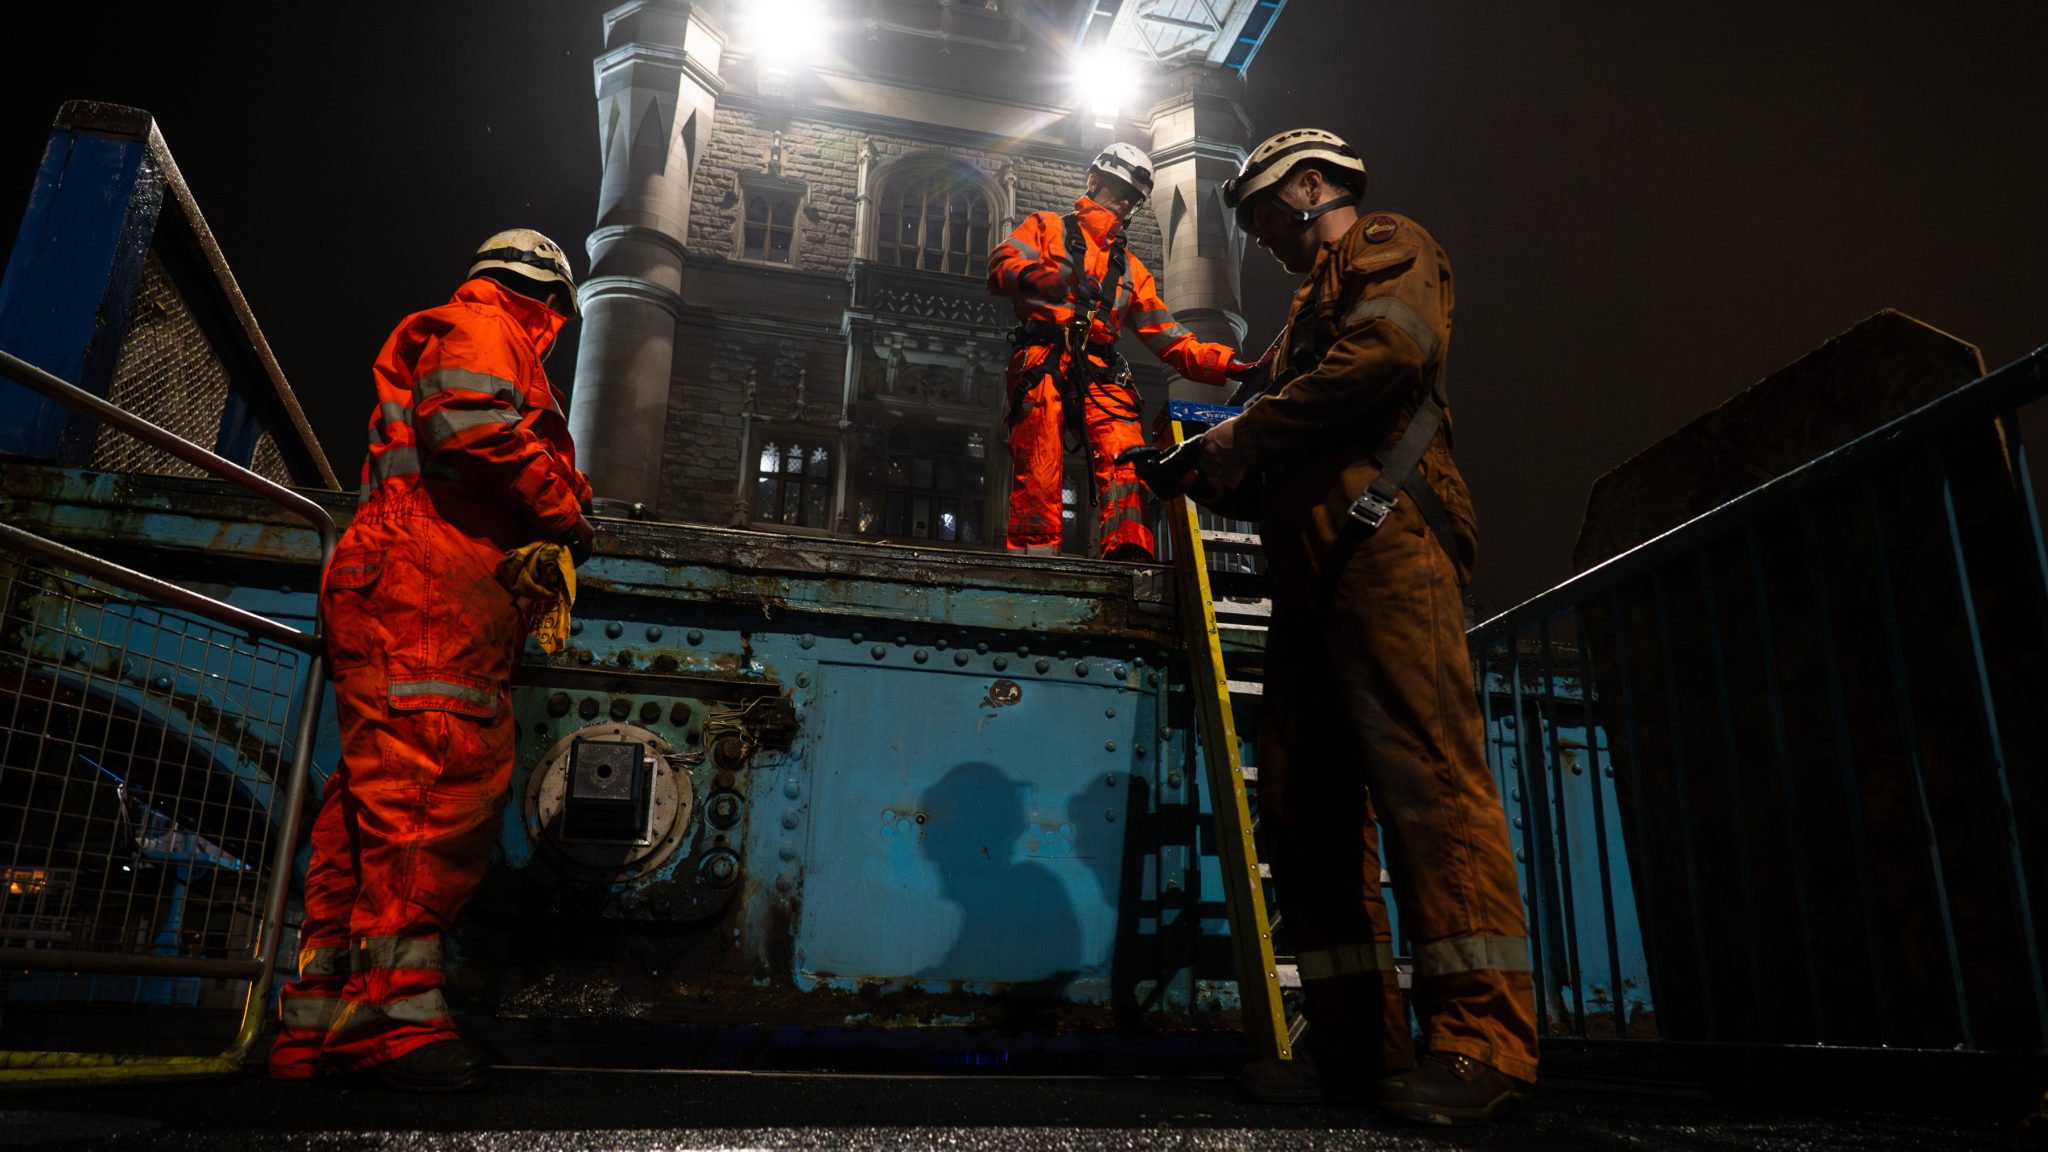 Three engineers in full protective gear and hard hats work on Tower Bridge at night.